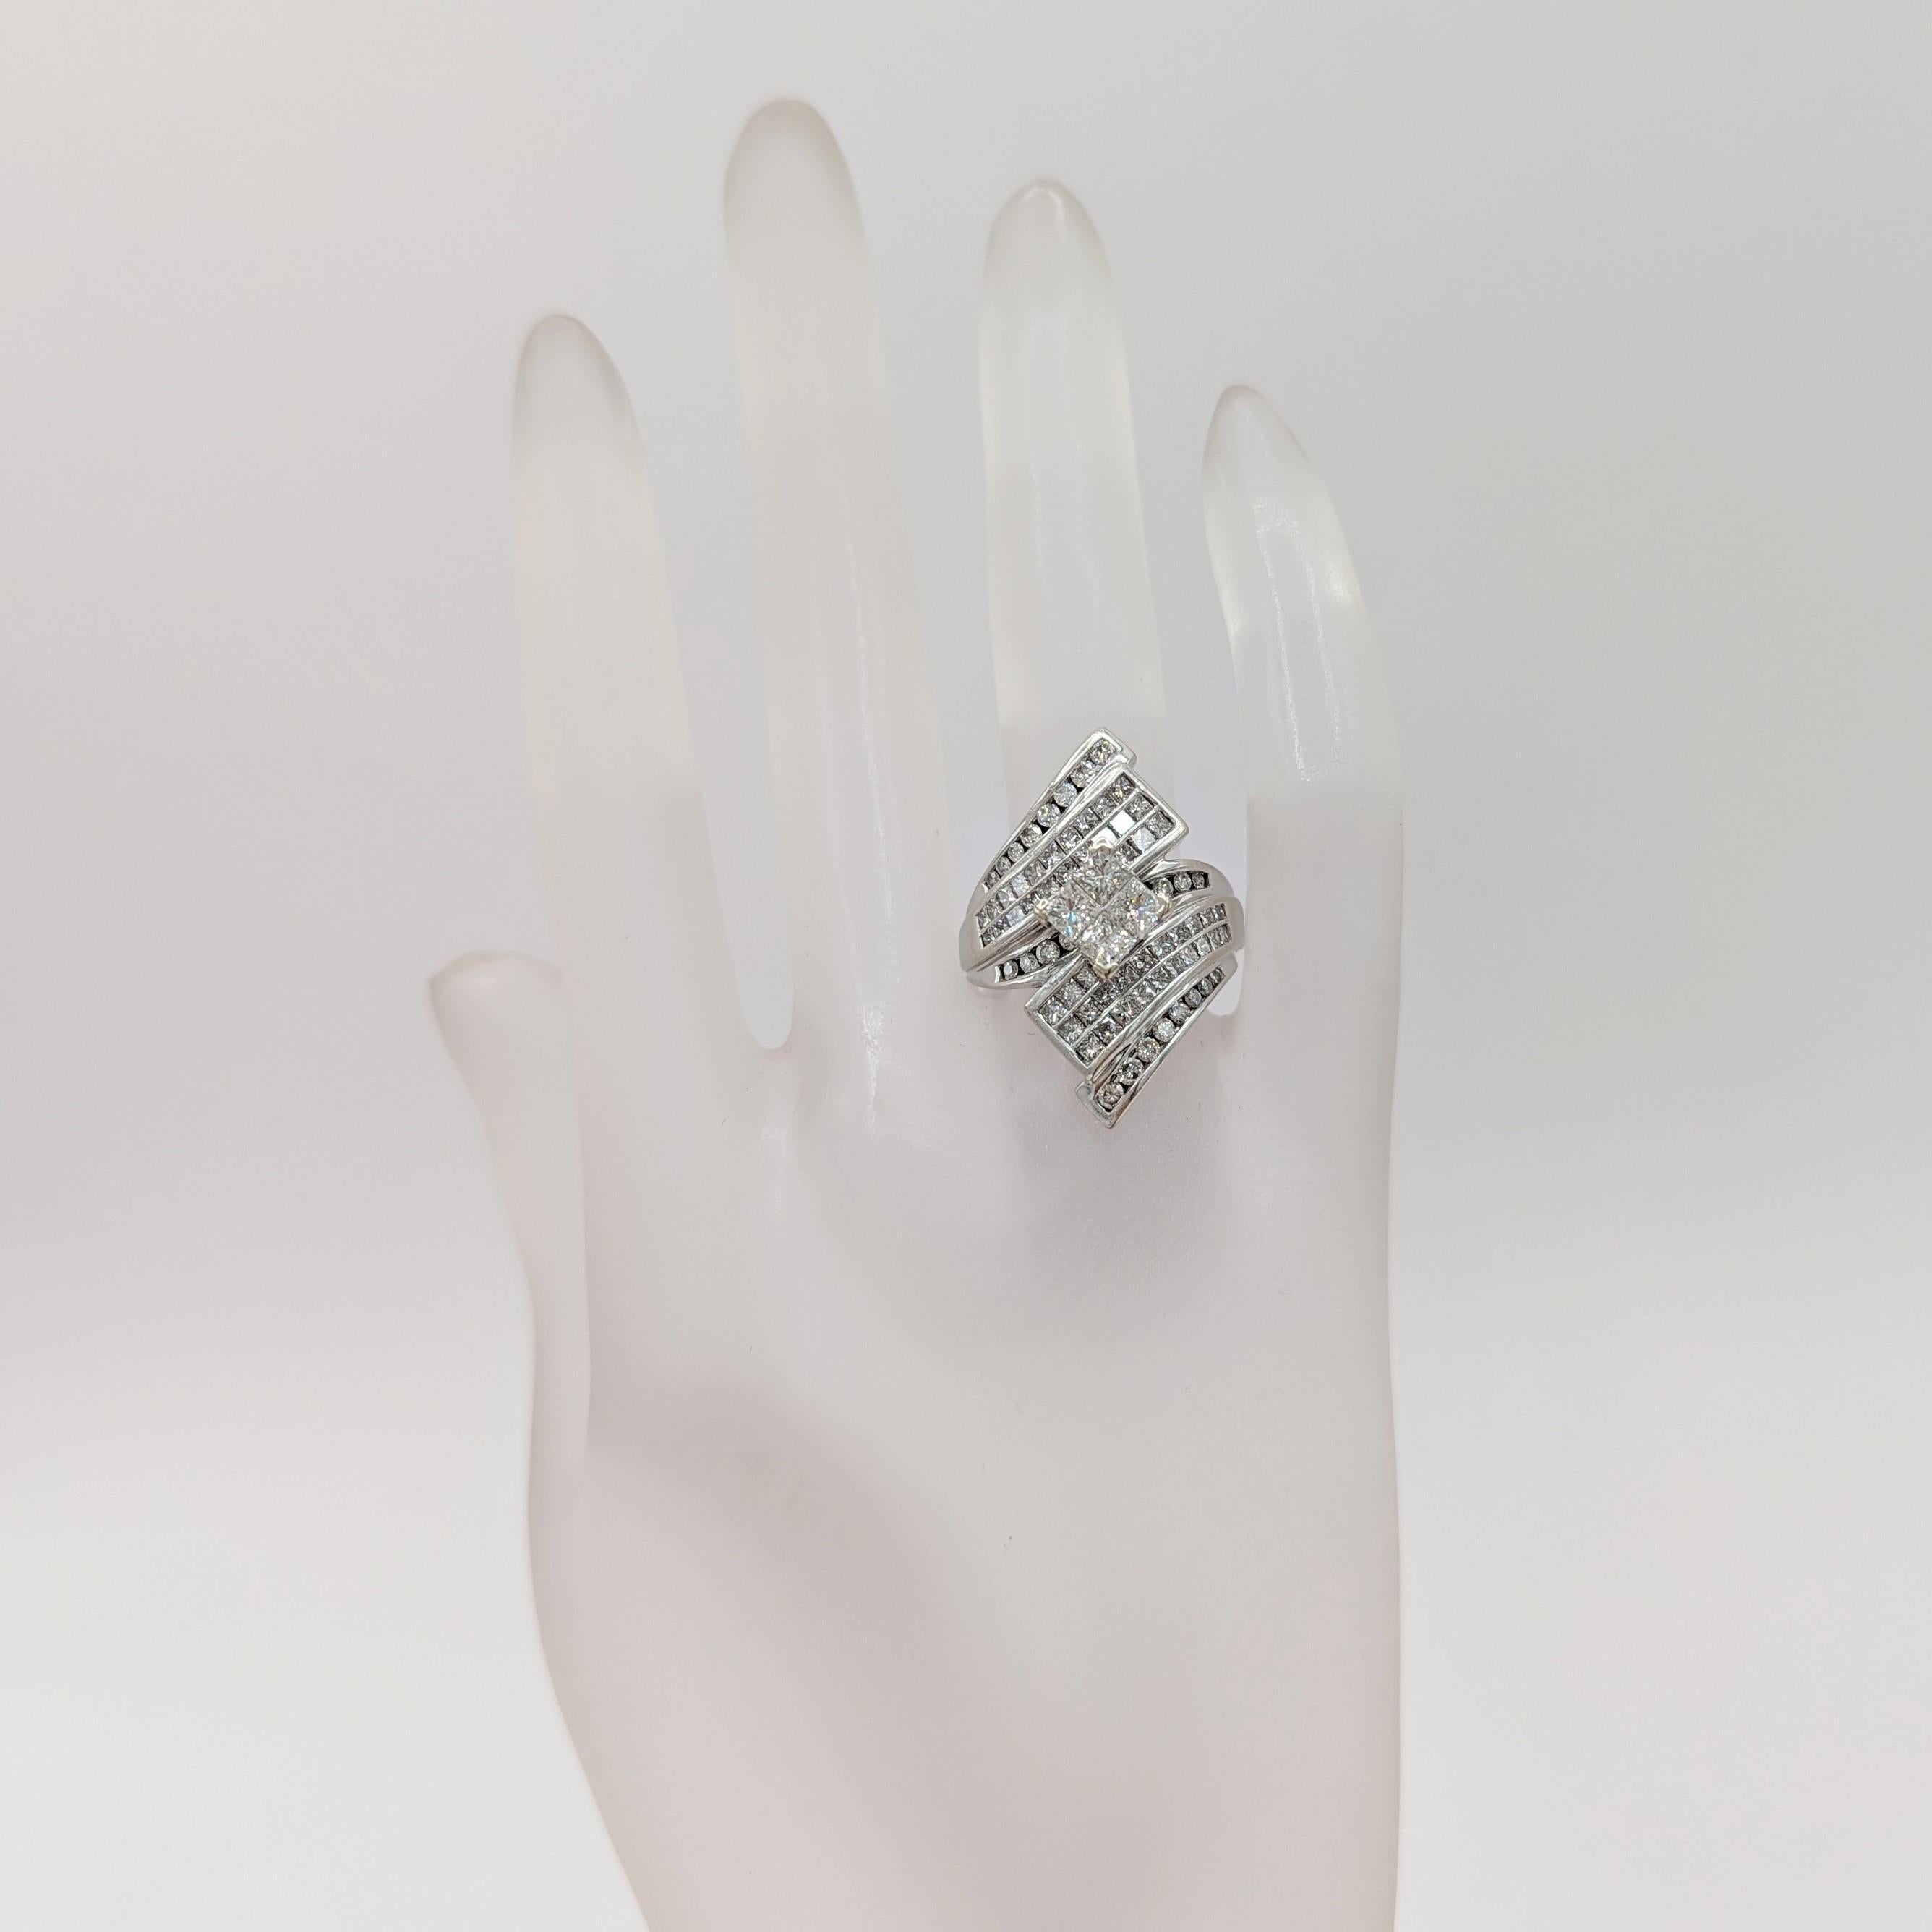 Beautiful 1.25 ct. white diamond squares and rounds.  Handmade in 14k white gold.  Ring size 7.25.